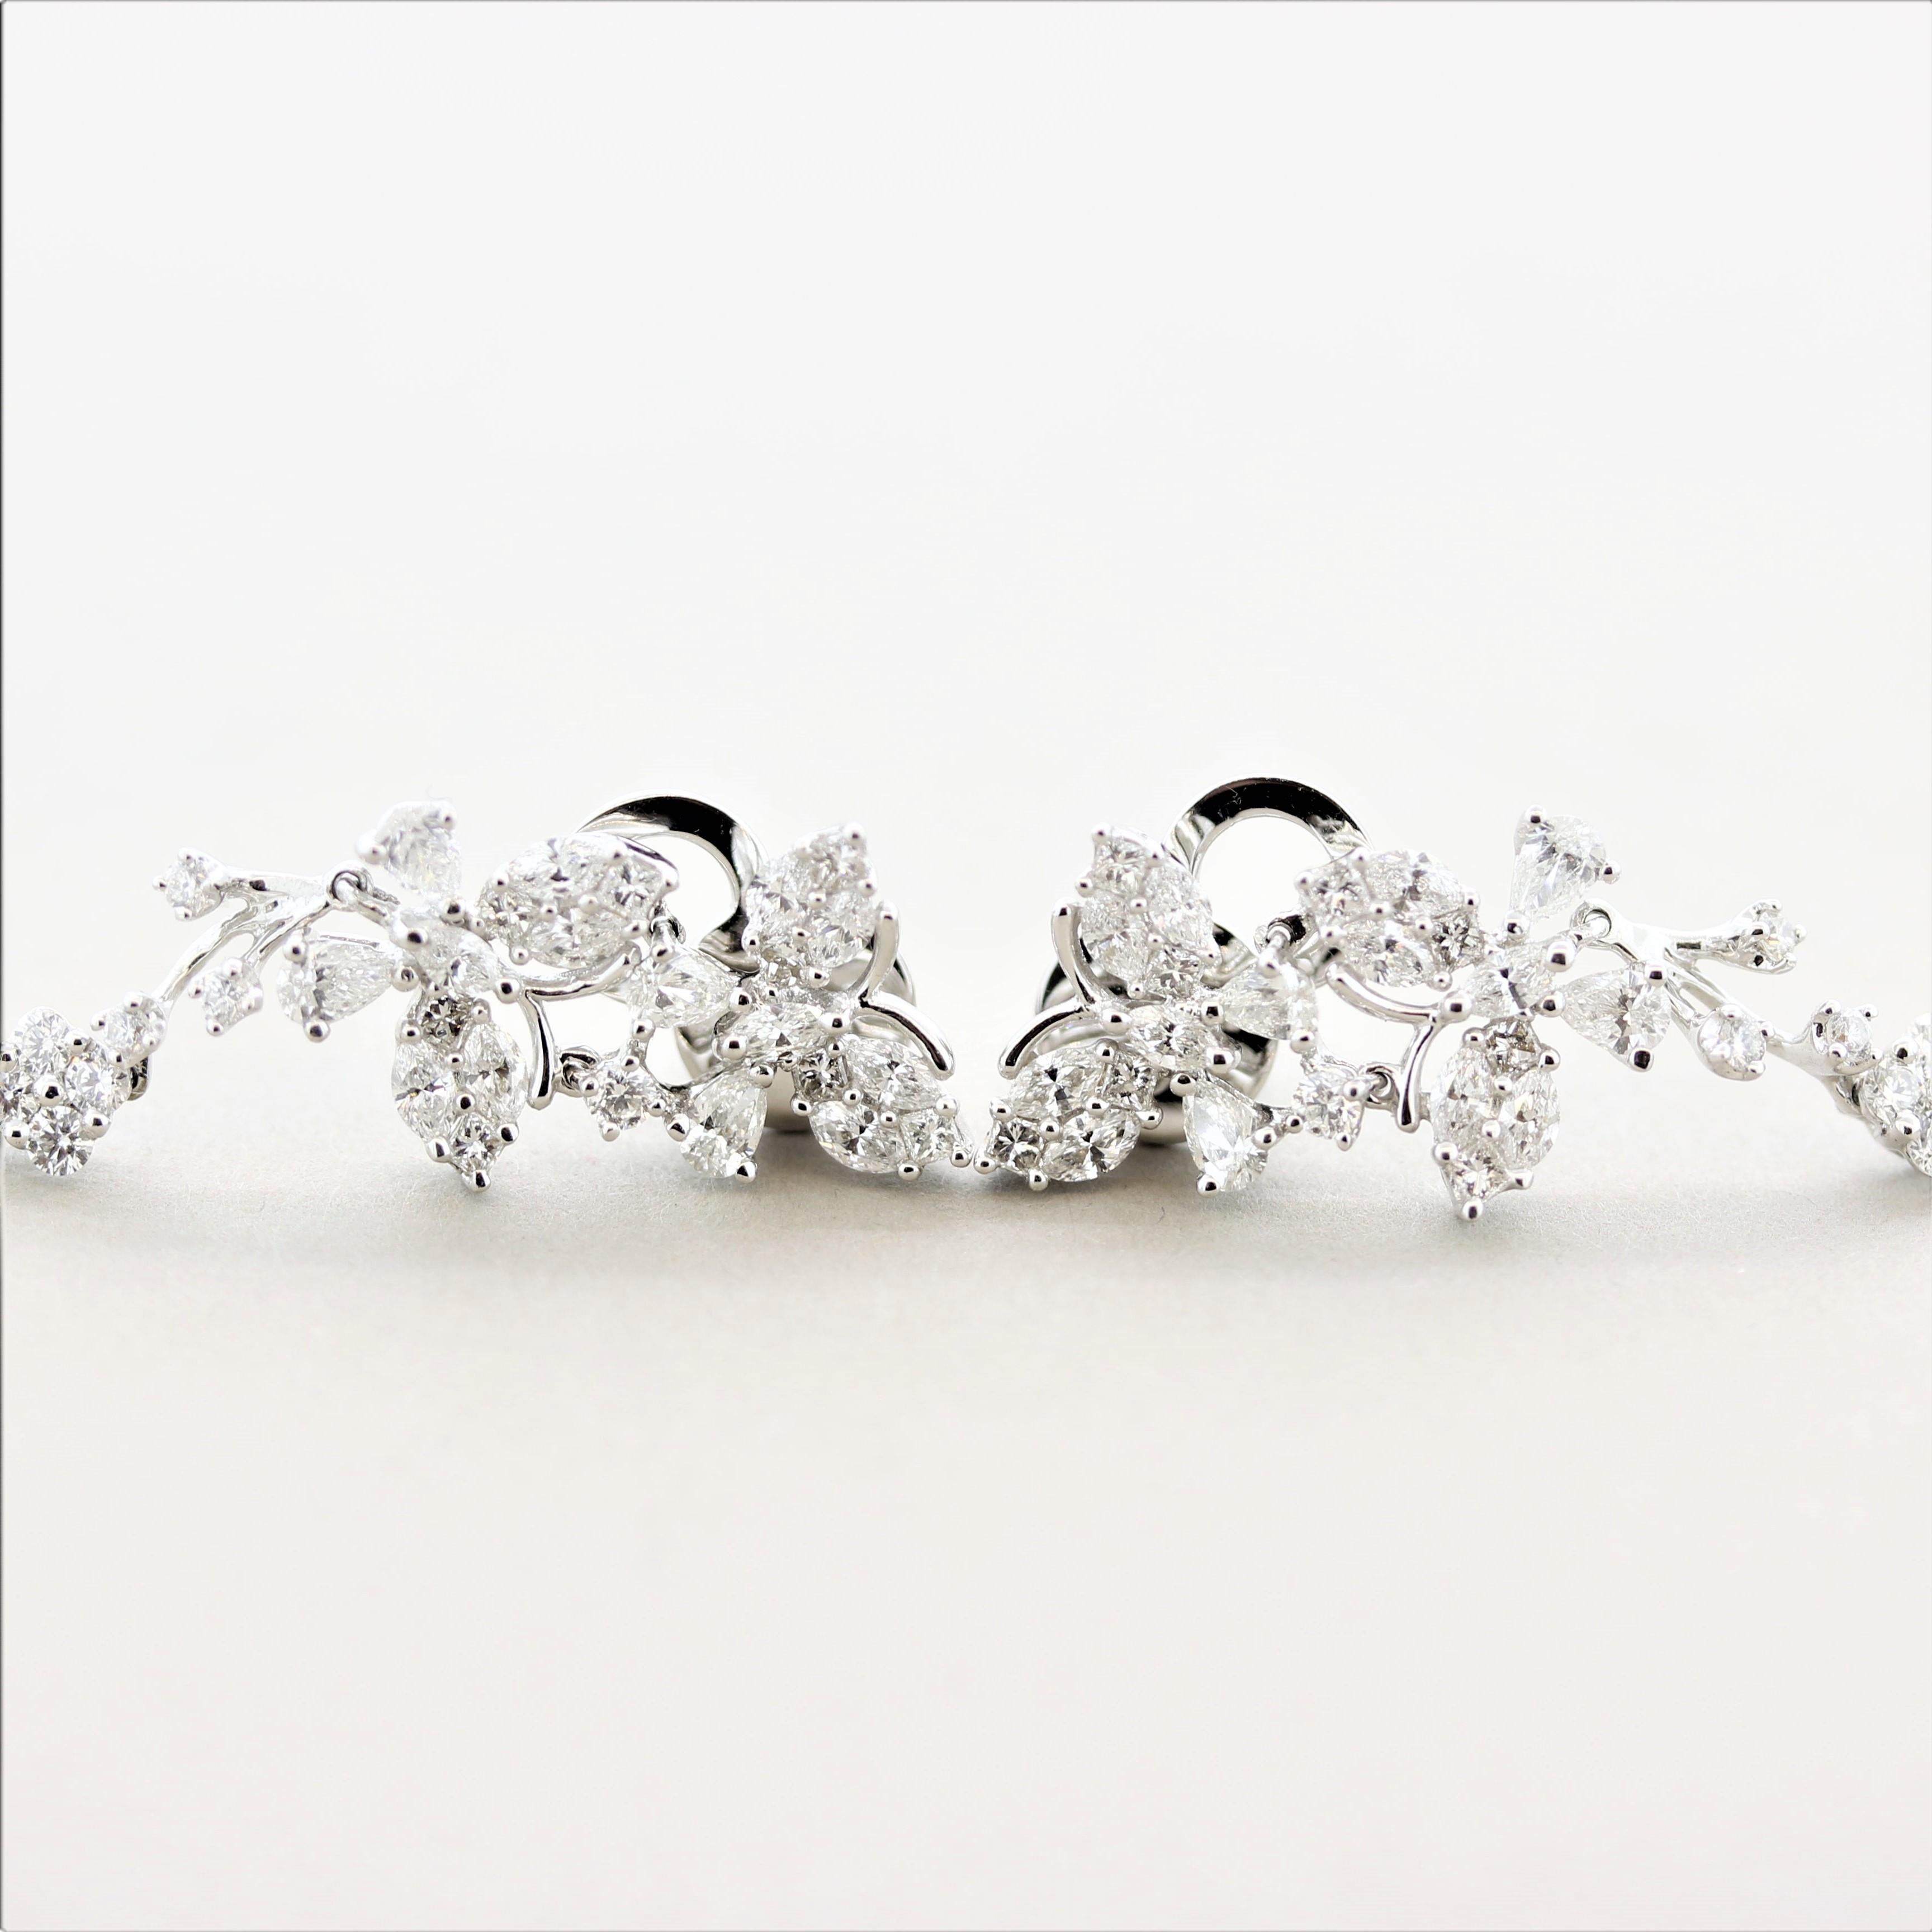 A unique pair of long dangle earrings featuring 3.31 carats of round brilliant-cut and pear-shaped diamonds set in floral designs and butterfly outlines. It appears as two diamond studded butterflies are flying up leaving a trail of diamond flowers